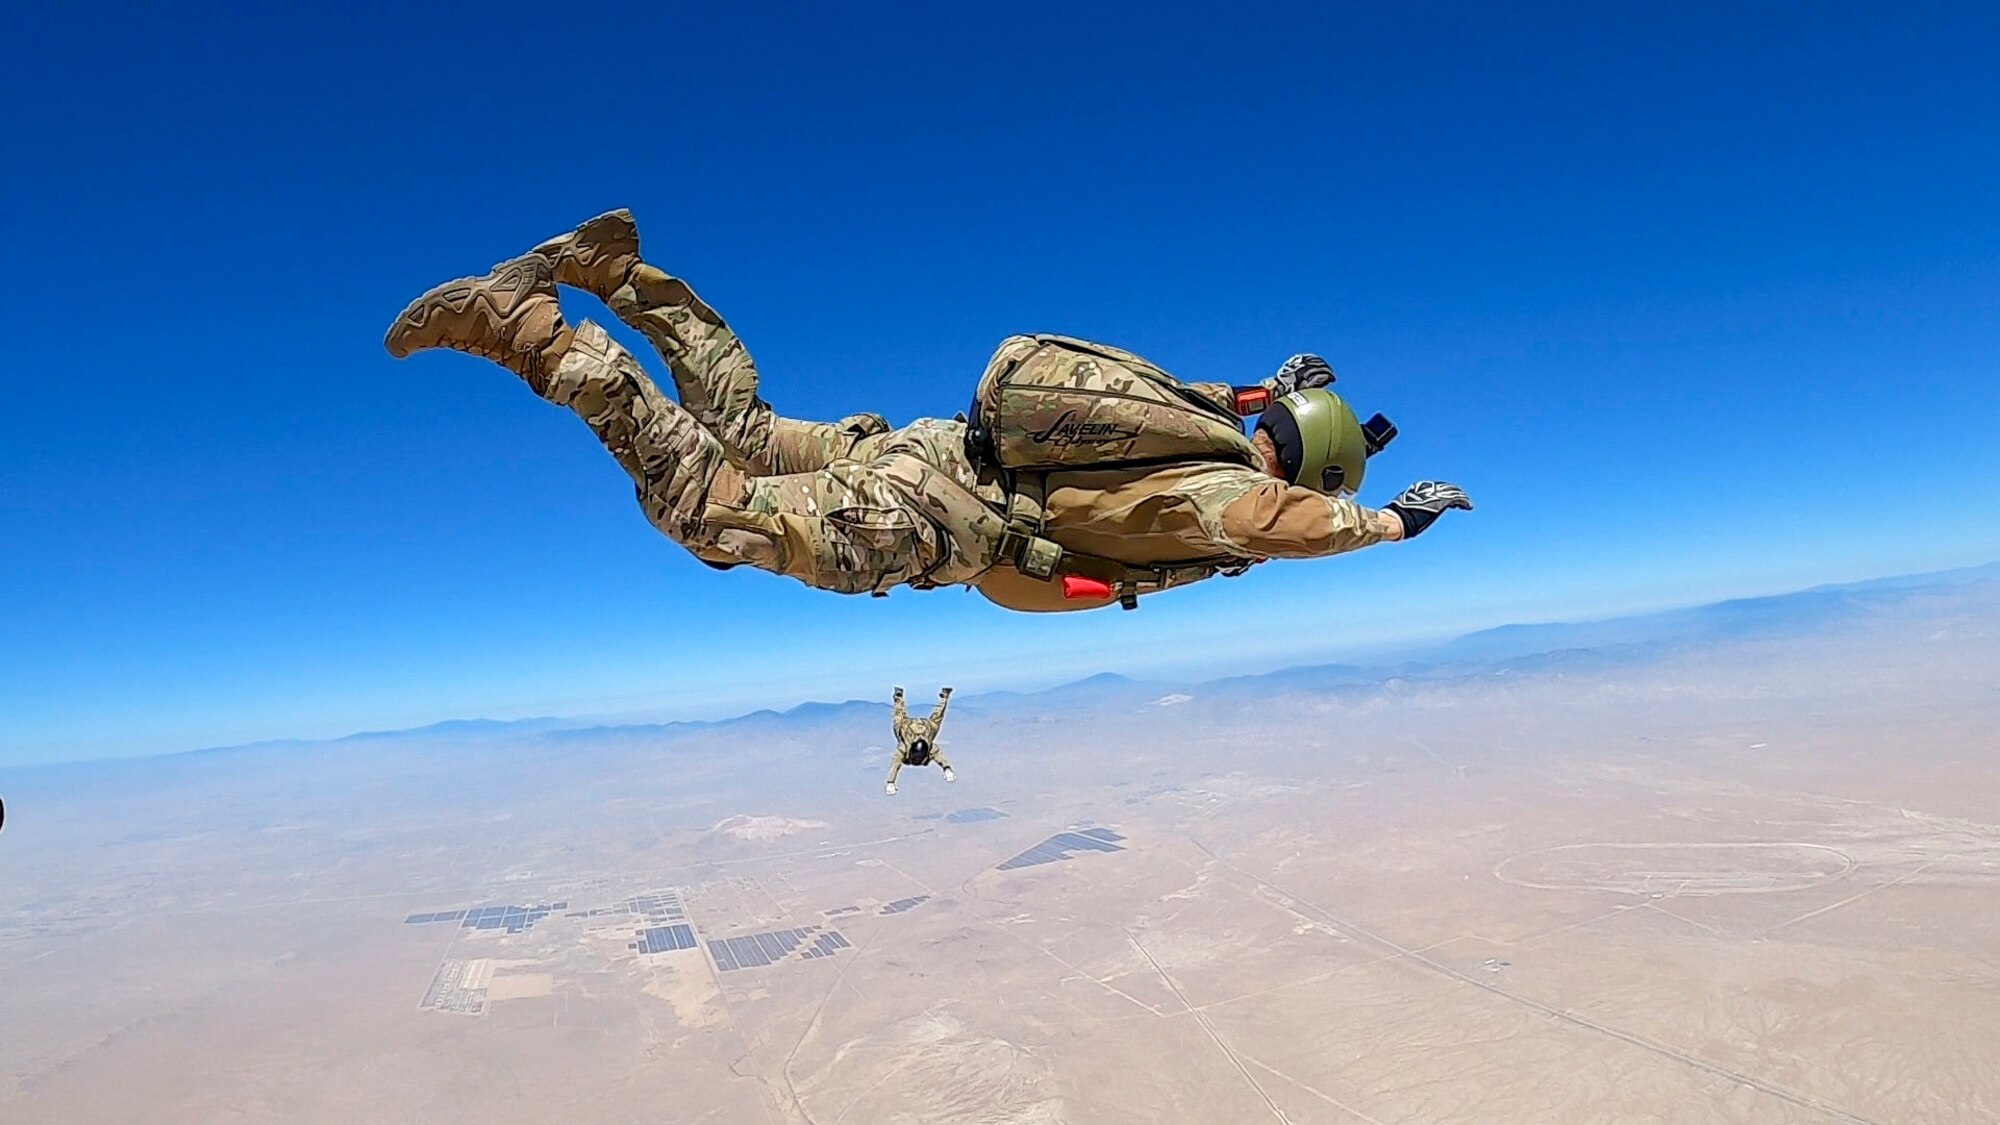 Parasim, the newly upgraded free fall simulator by the 412th Operations Support Squadron, puts our test parachutists in the most realistic scenario possible to train for a real skydive jump.